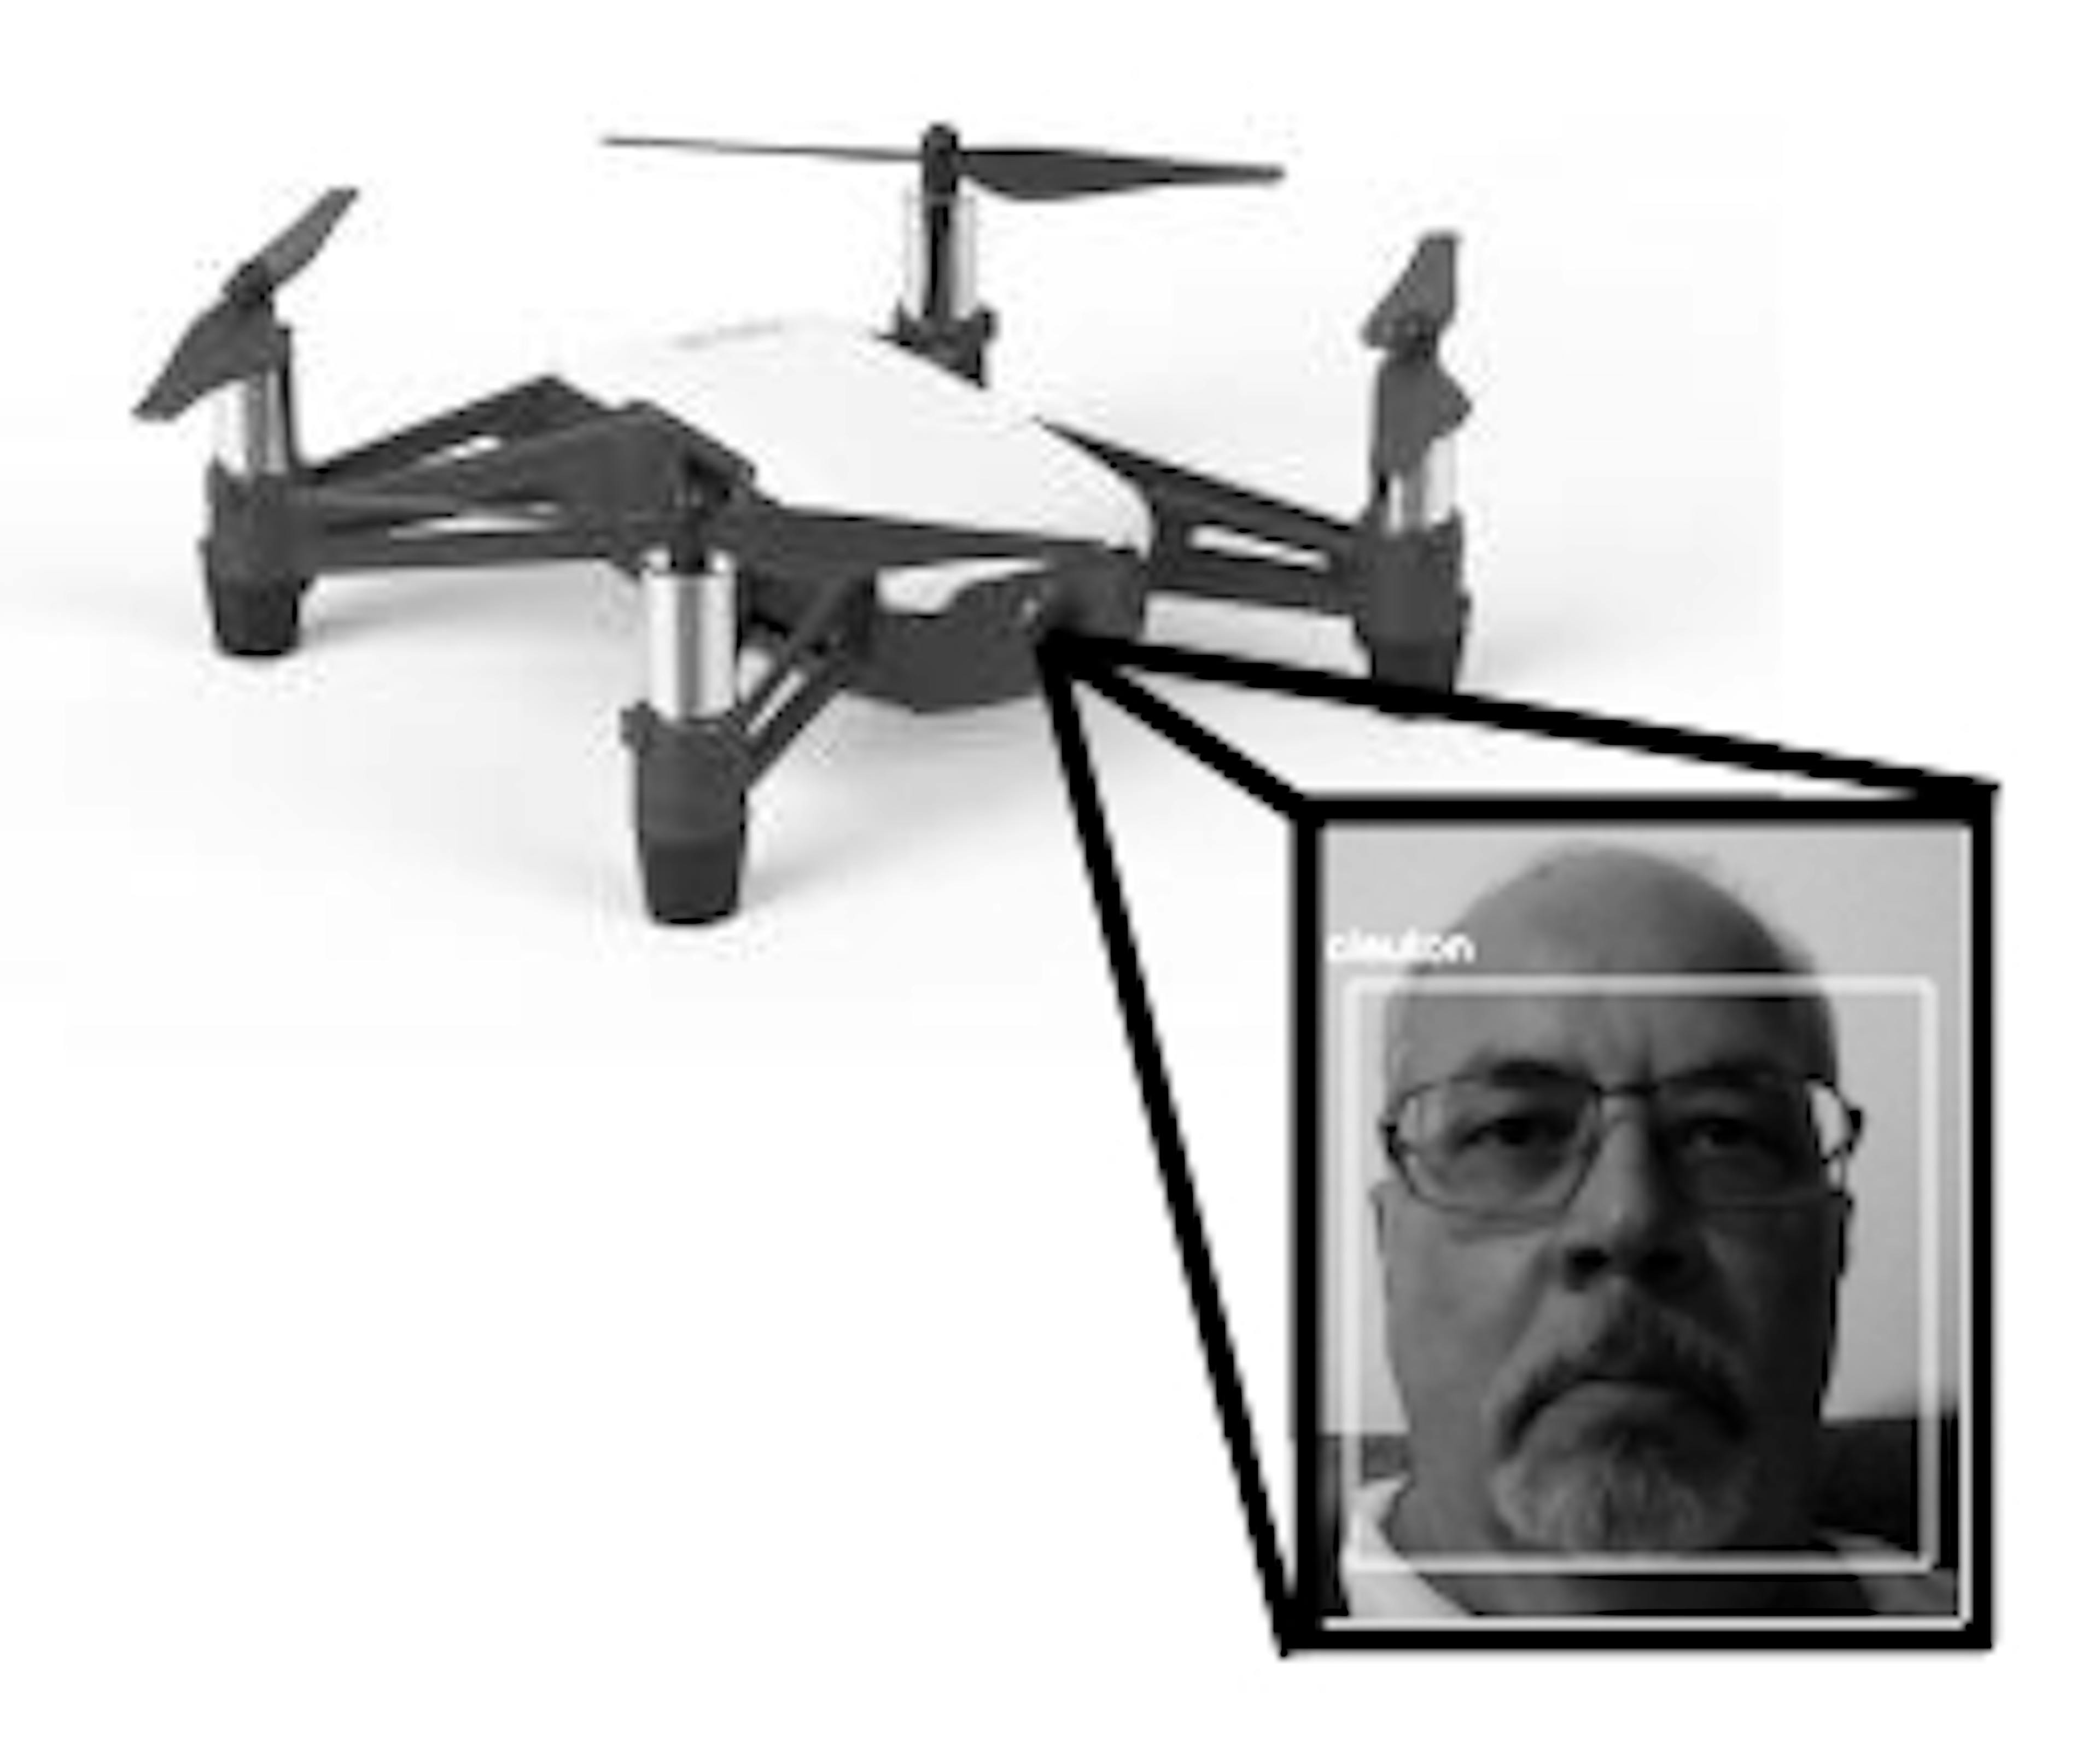 /facial-recognition-on-drone-f91353yvg feature image